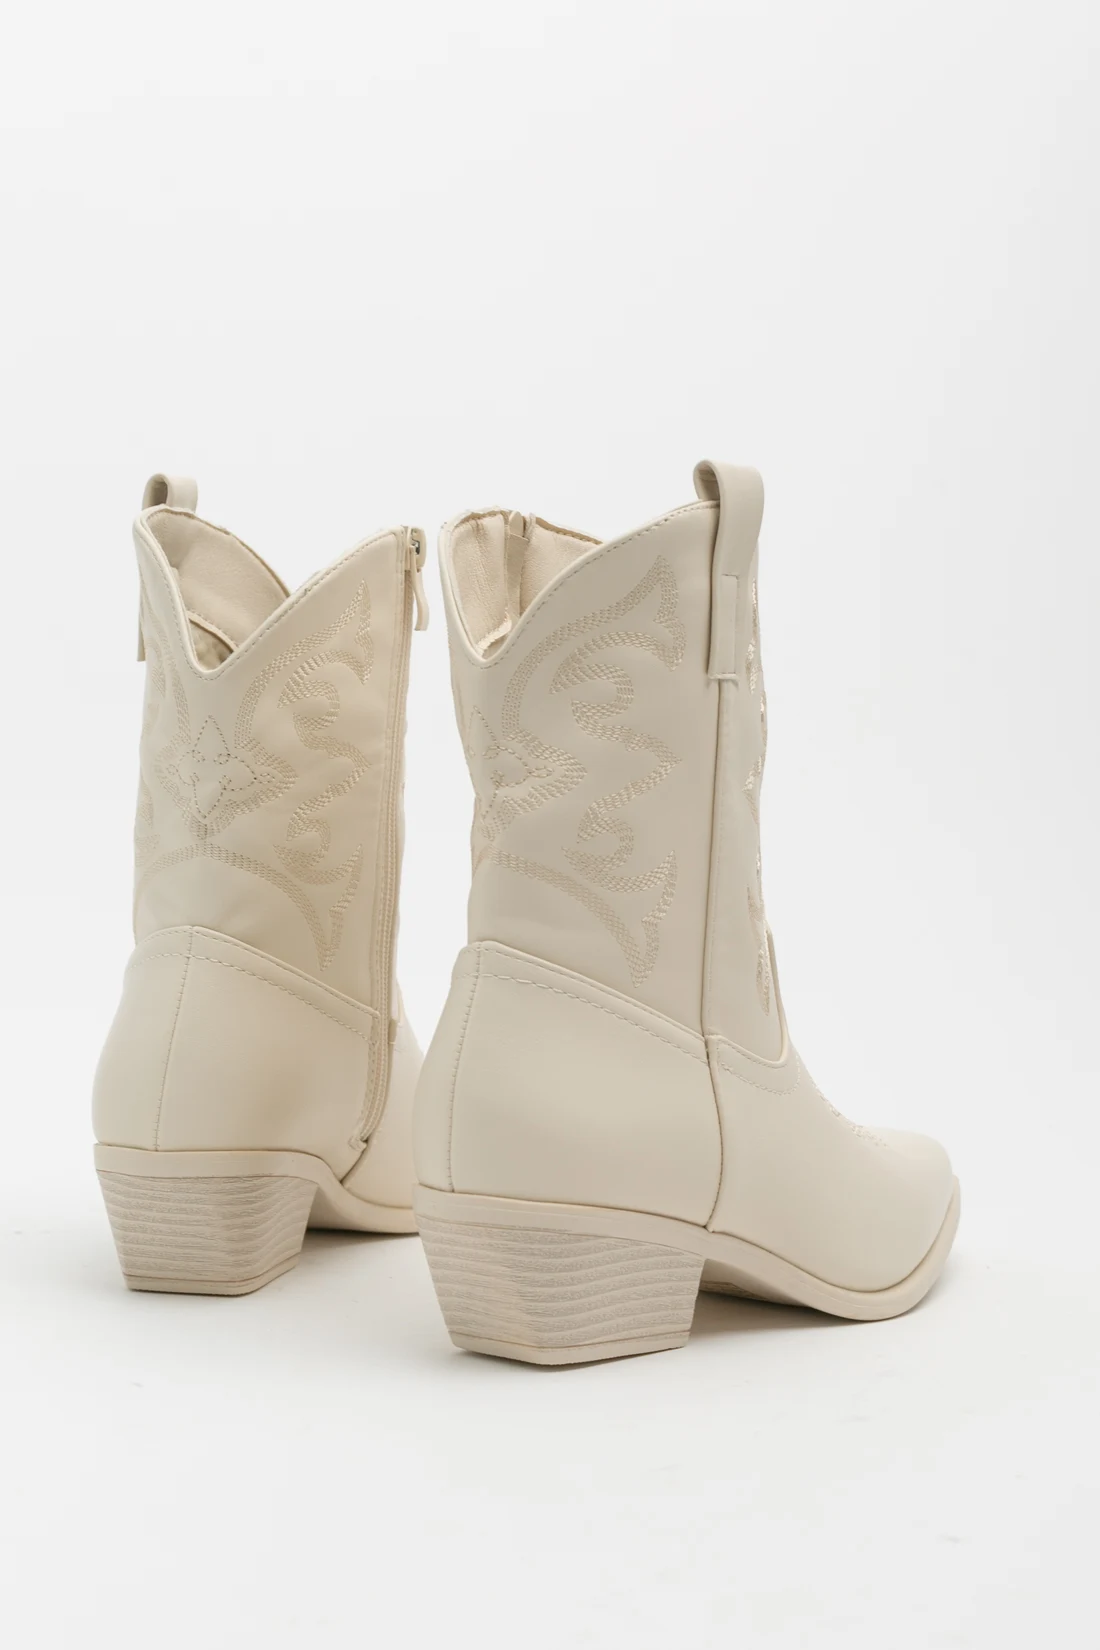 BANYO LOW BOOT - BEIGE